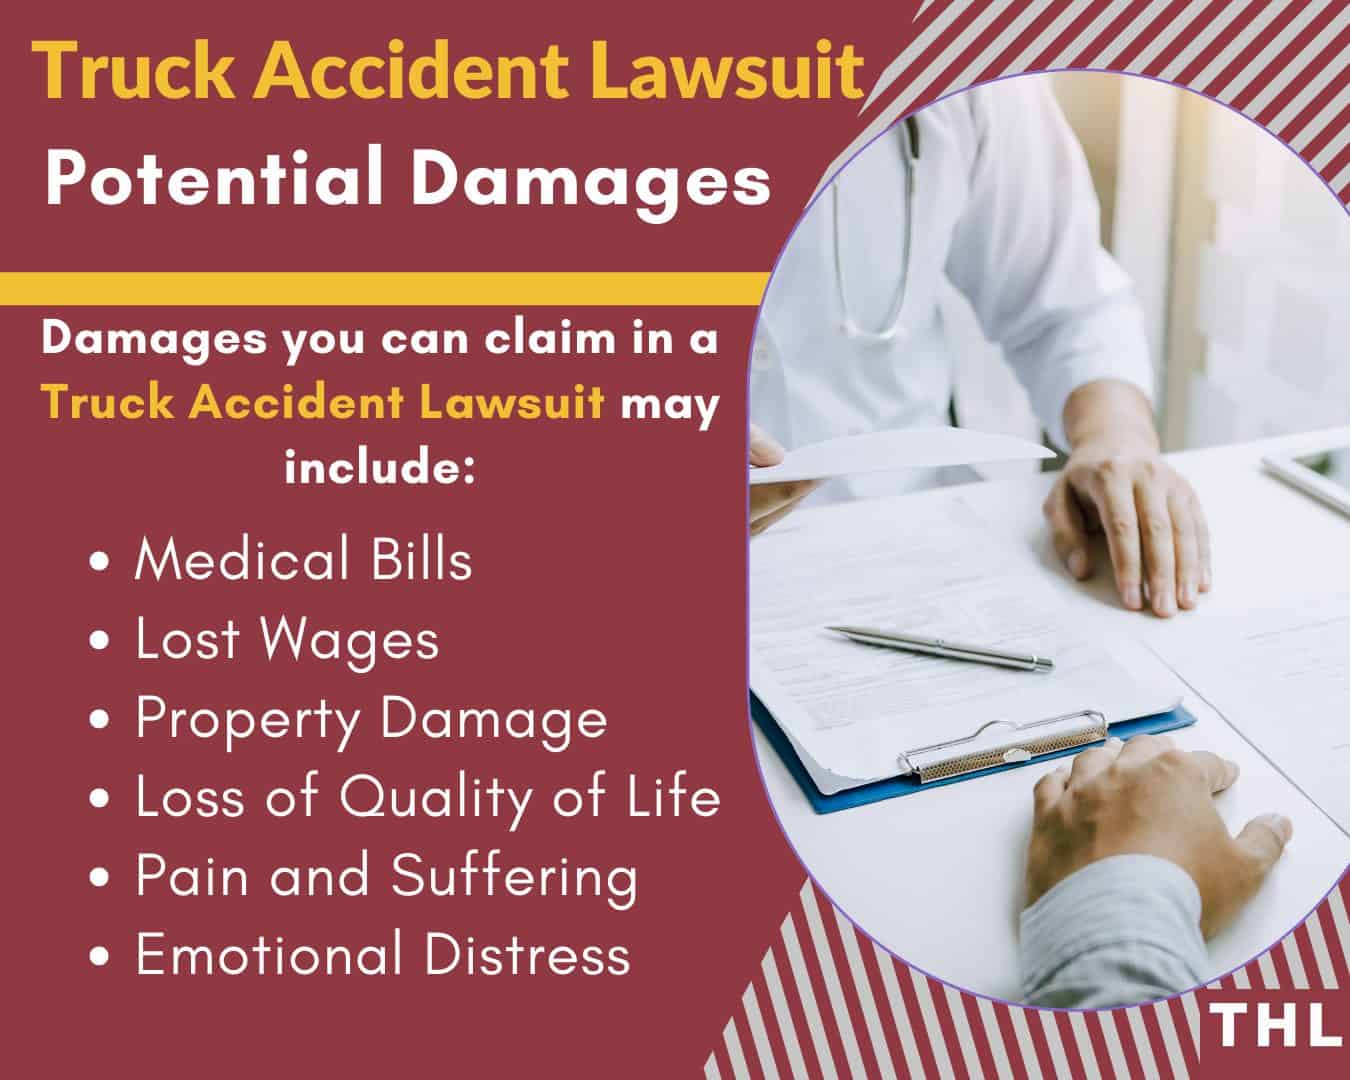 truck accident lawyer; truck accident lawsuit; truck accident attorney; edwardsville truck accident; edwardsville truck accident lawyer; personal injury lawyer; edwardsville personal injury; edwardsville personal injury lawsuit; truck lawsuit; truck injury lawsuit; truck accident injury; truck accident injuries; injured in truck crash; semi truck accident lawyer; semi truck accident lawsuit